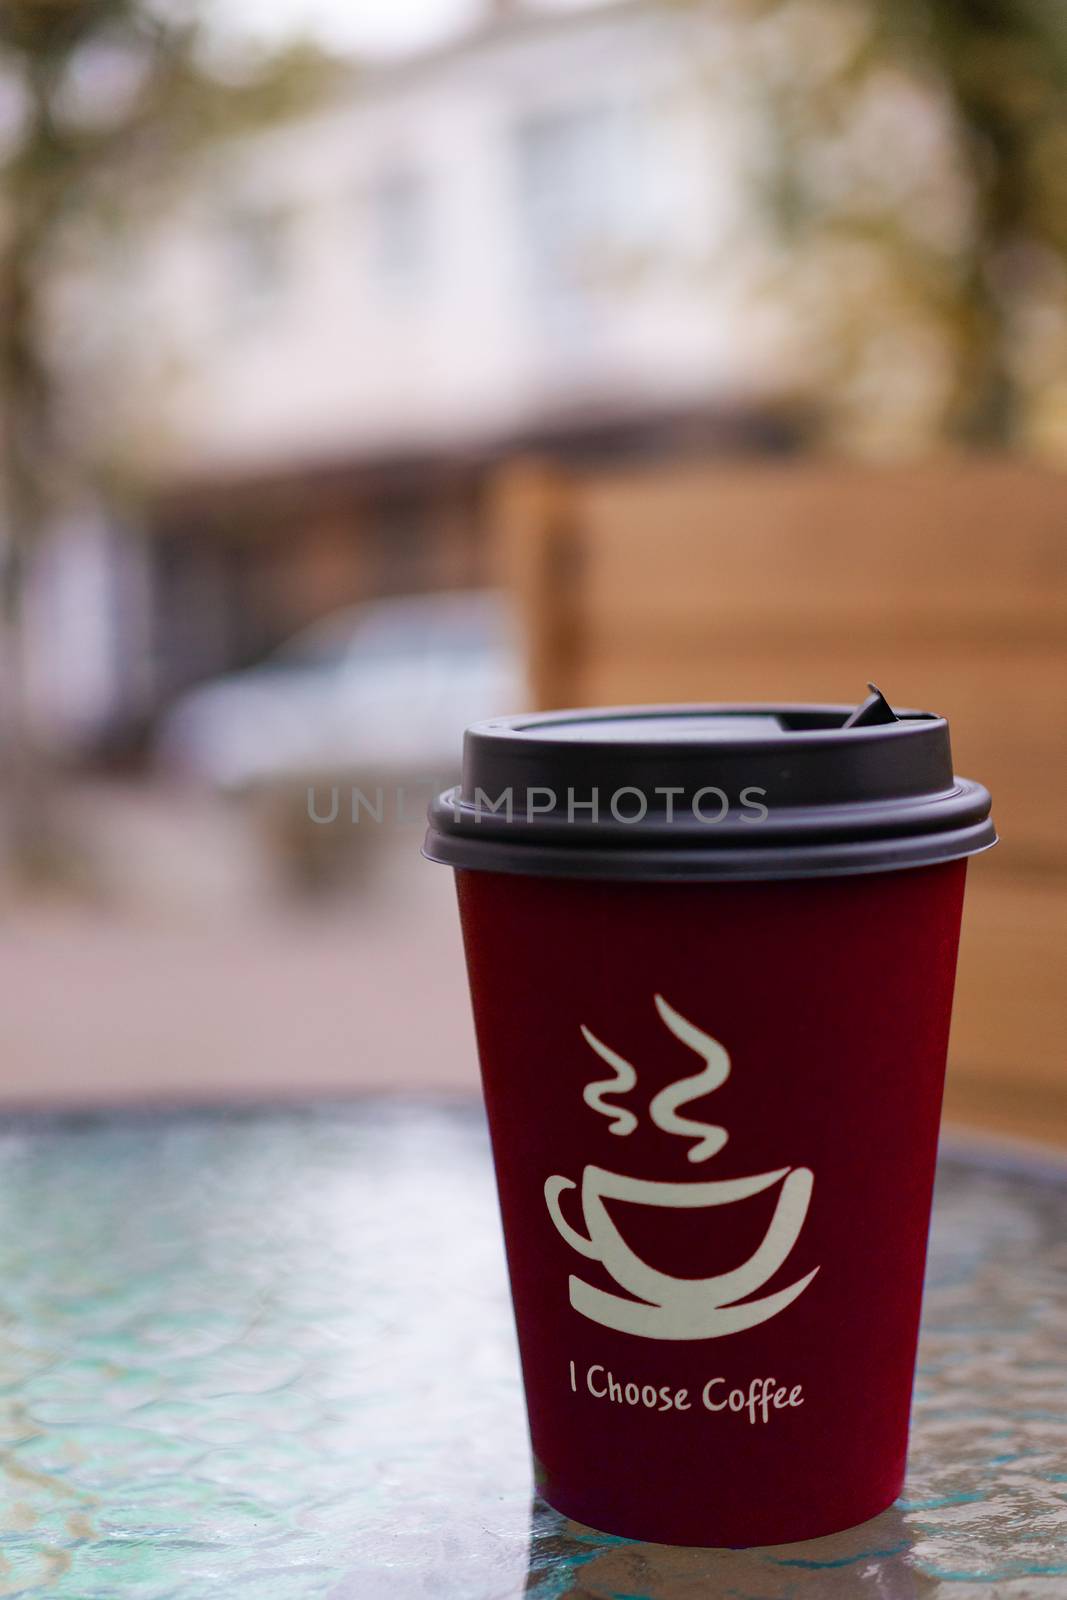 Red coffee paper cup on glass clear table. On cup wrote: "I choose coffee". Beginning a good day! by alexsdriver